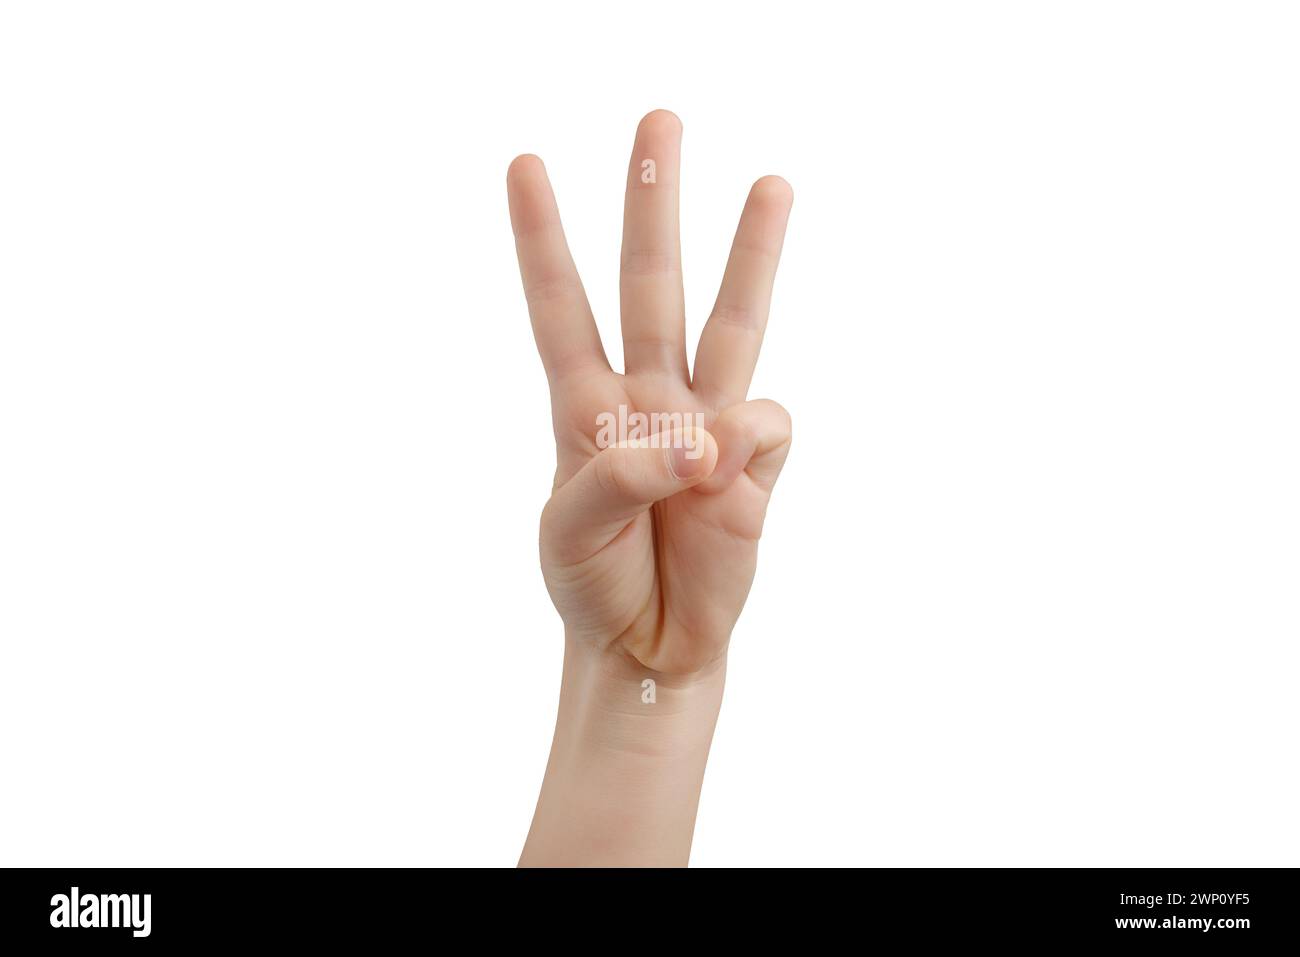 Three middle fingers extended. Hand gesture isolated on white background Stock Photo